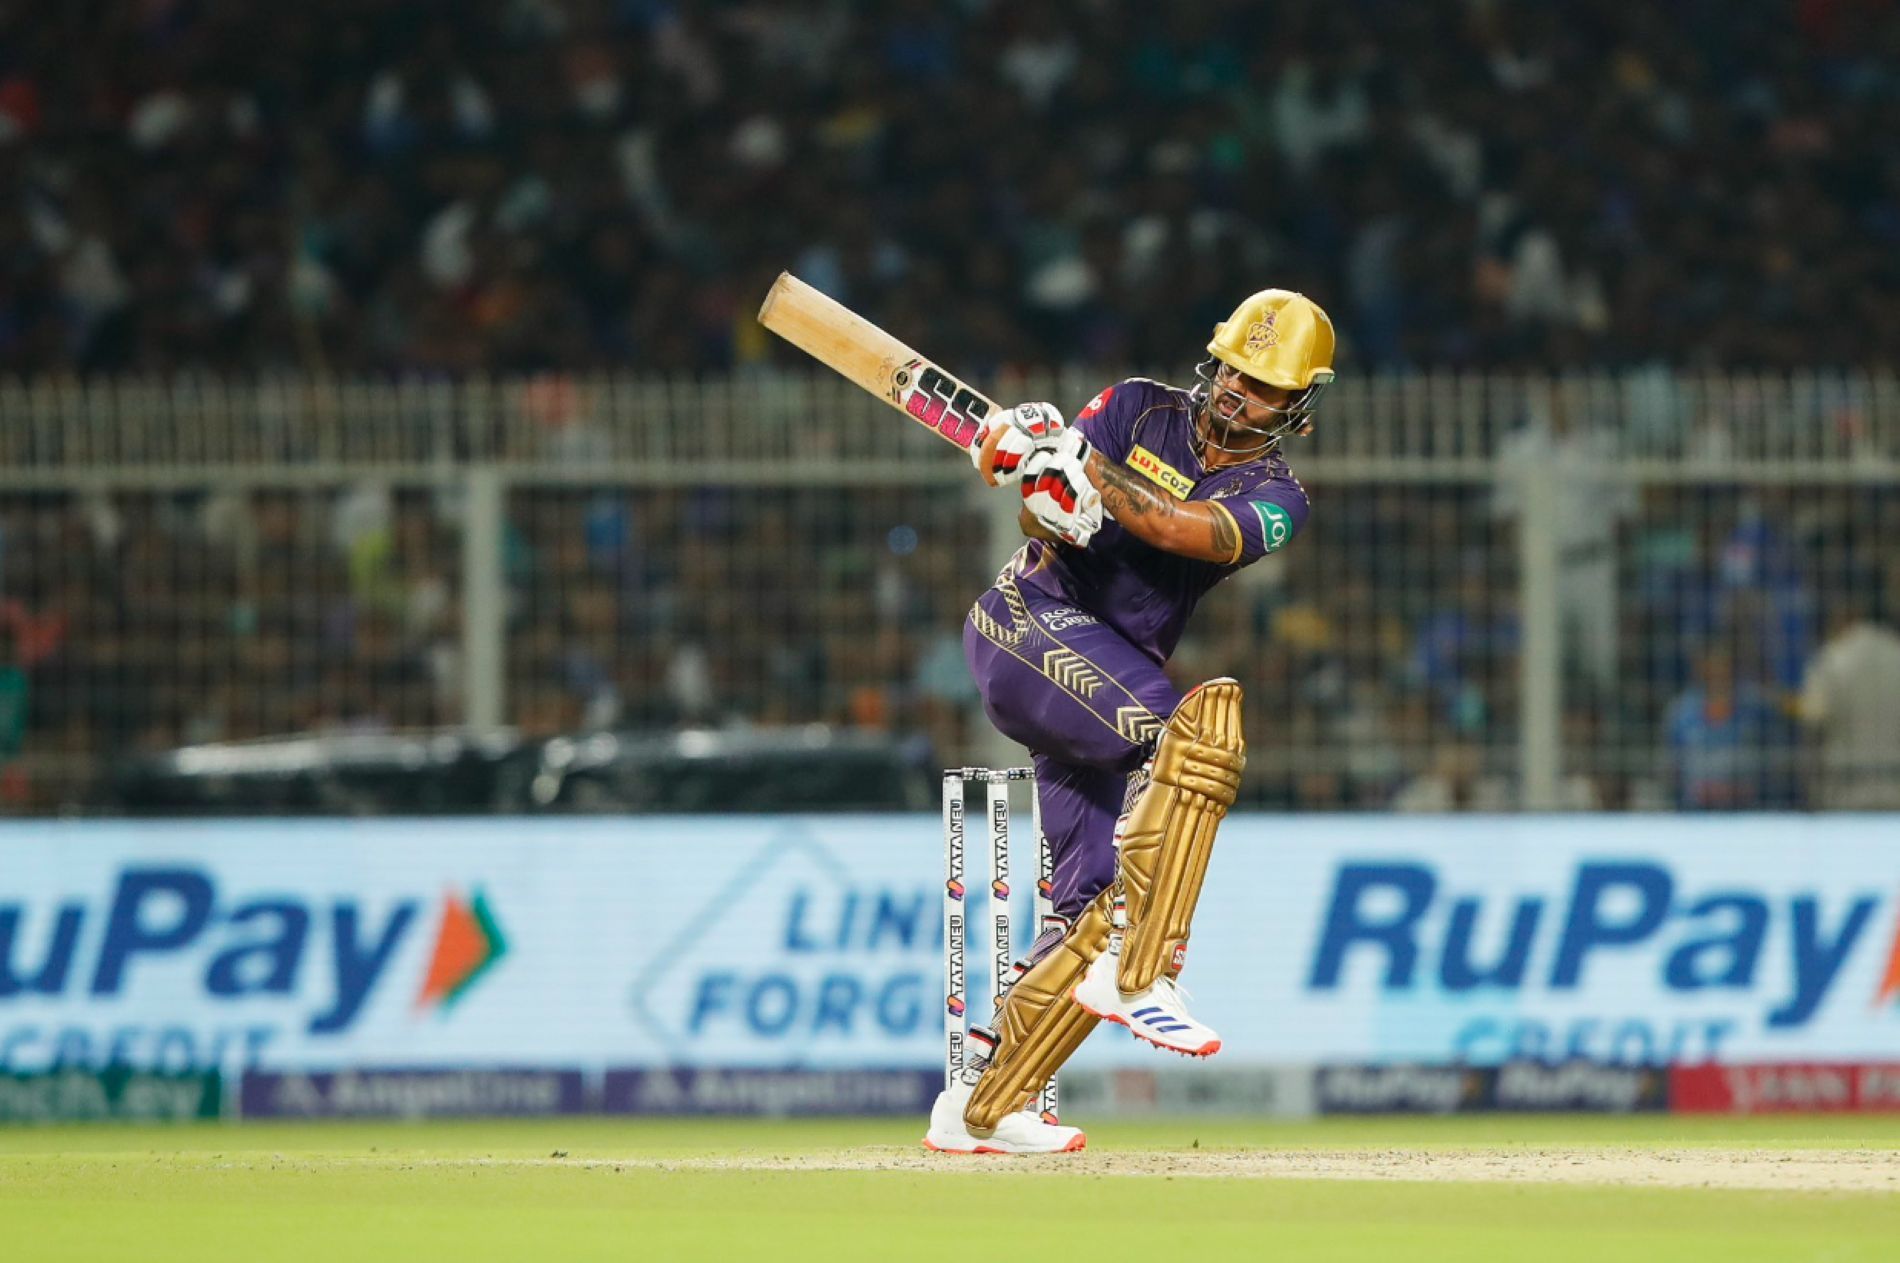 Rana added crucial runs for KKR in his comeback game against MI [Credit: KKR Twitter handle]